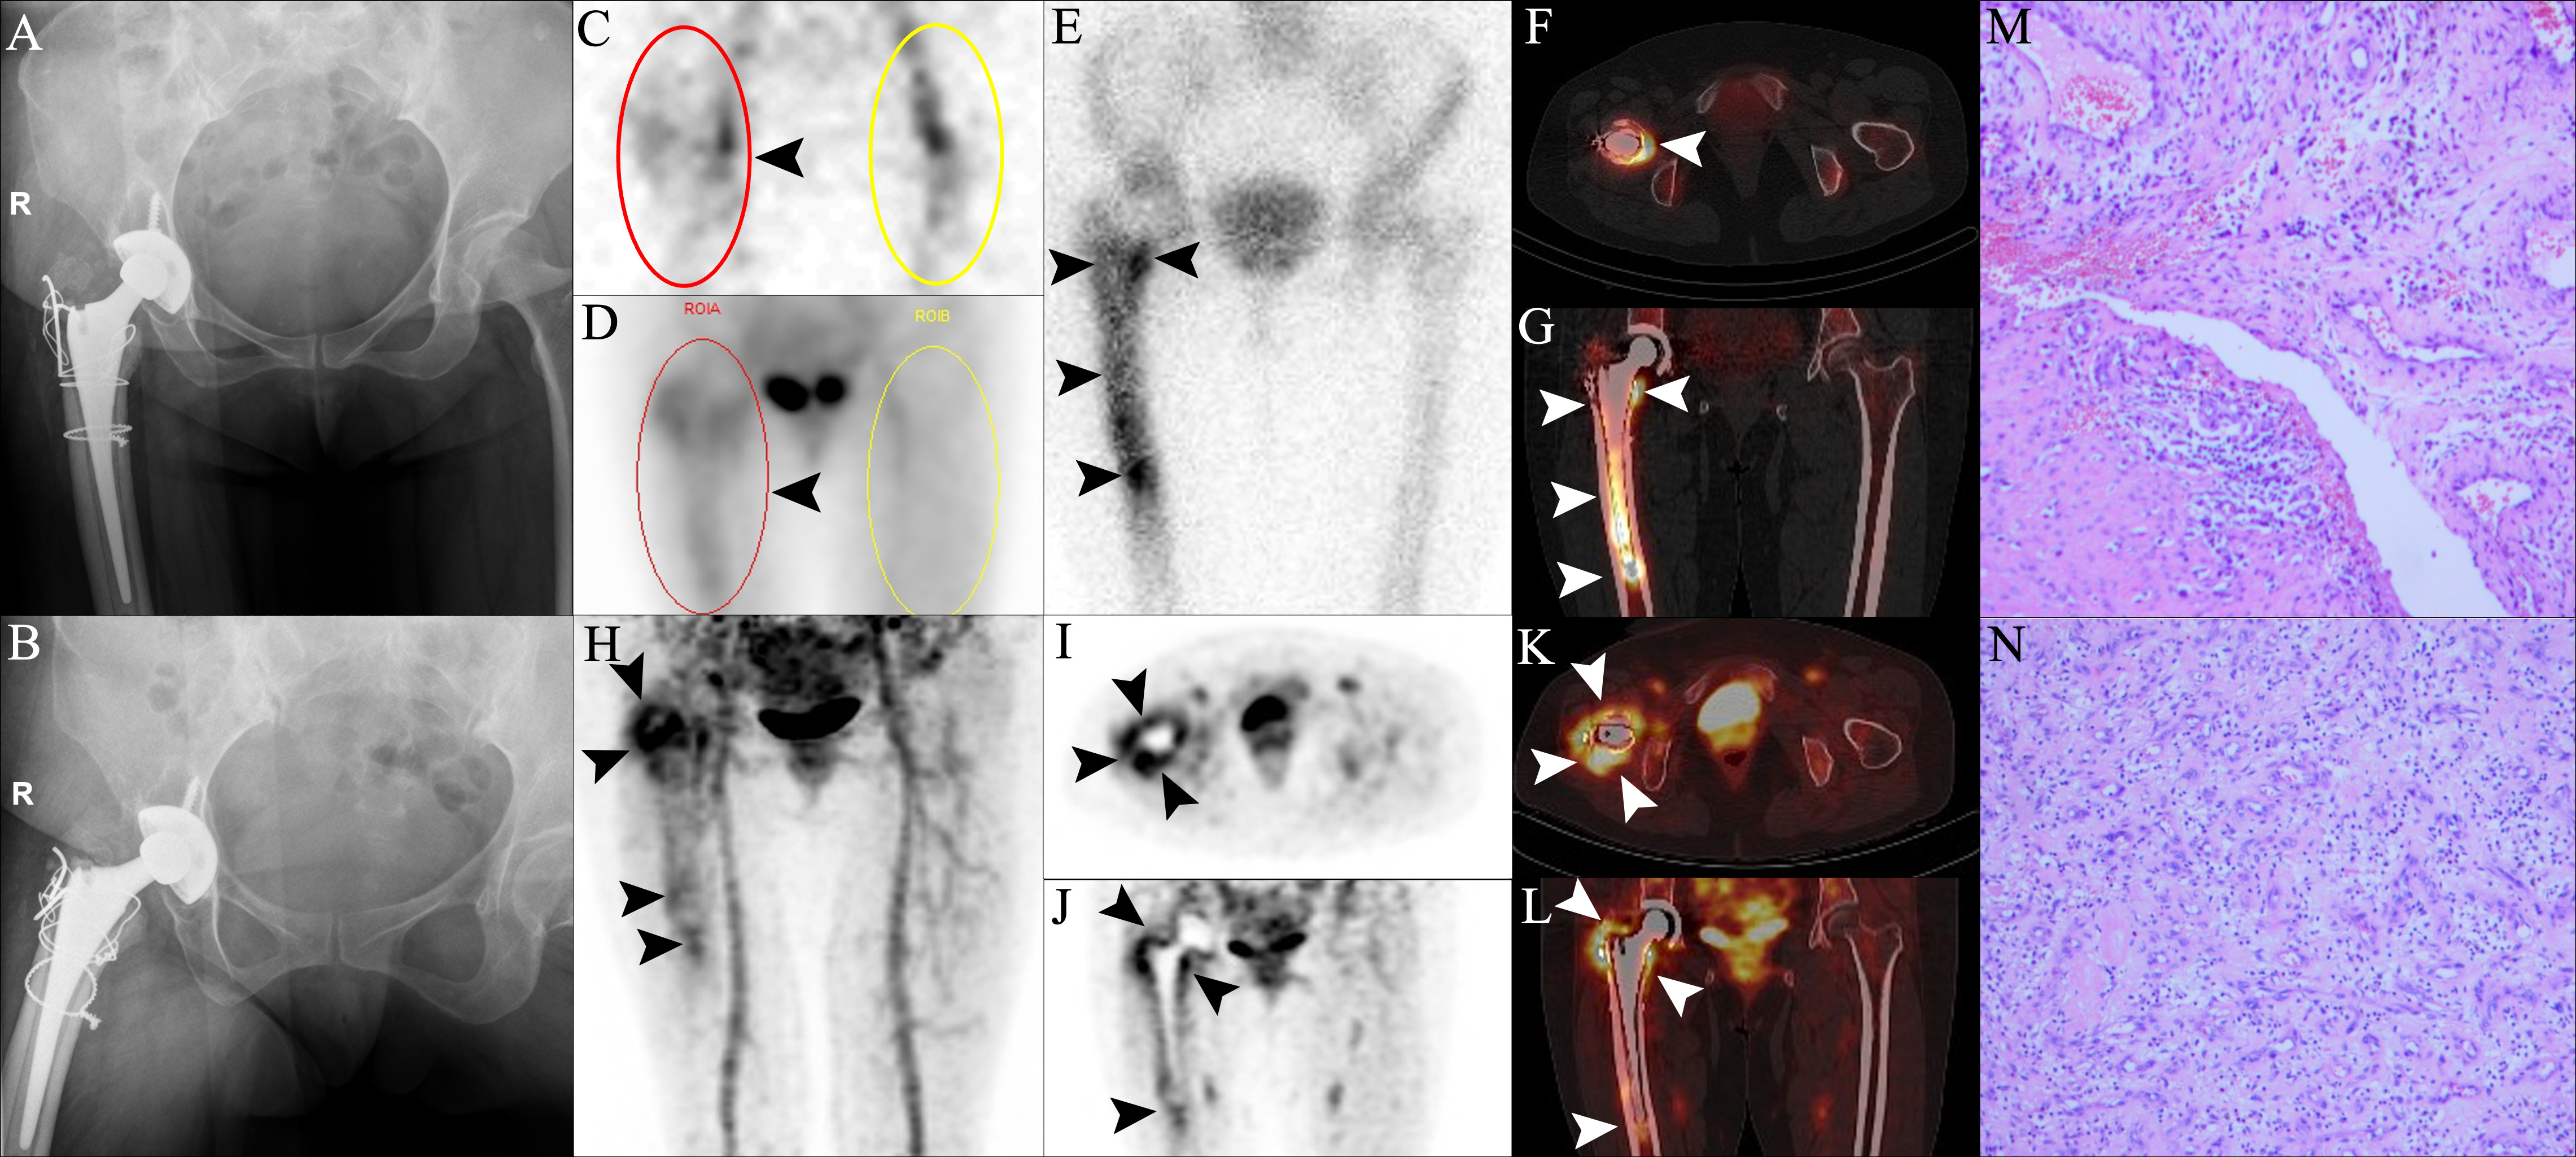 Fig. 2 
          Positive findings for infection in the three-phase bone scan, single-photon emission CT (SPECT)/CT, and positron emission tomography (PET)/CT in a patient with periprosthetic joint infection (PJI) confirmed by microbiological culture of Staphylococcus aureus and Escherichia coli. A 46-year-old woman underwent right hip arthroplasty for traumatic osteoarthritis in 2018, and developed pain in the right hip joint in April 2020. a) and b) Anteroposterior (AP) and lateral radiographs of the right hip joint at two years postoperatively showed an uneven decrease in bone density around the prosthesis. c) to e) 99mTc-MDP three-phase bone scan showed positive perfusion, blood pool, and delayed phase in the right hip (arrowheads) (red circles of c) to d) – region of interest of the affected side; yellow circles of c) to d) – region of interest of the normal side). f) and g) SPECT/CT revealed a diffuse increase in bone metabolism in the femoral prosthesis (arrowheads). h) to l) 68Ga-citrate PET/CT showed uneven diffuse uptake of the right femur trochanter around the soft-tissue and the distal femoral prosthesis (arrowheads). The patient underwent surgical treatment, and a large amount of pus was found in the right hip joint. m) and n) Histopathological examination revealed many neutrophils, lymphocytes, and plasma cells (haematoxylin and eosin (H&E) 200×). Microbial culture showed the presence of Staphylococcus aureus and Escherichia coli. PJI of the right hip was diagnosed.
        